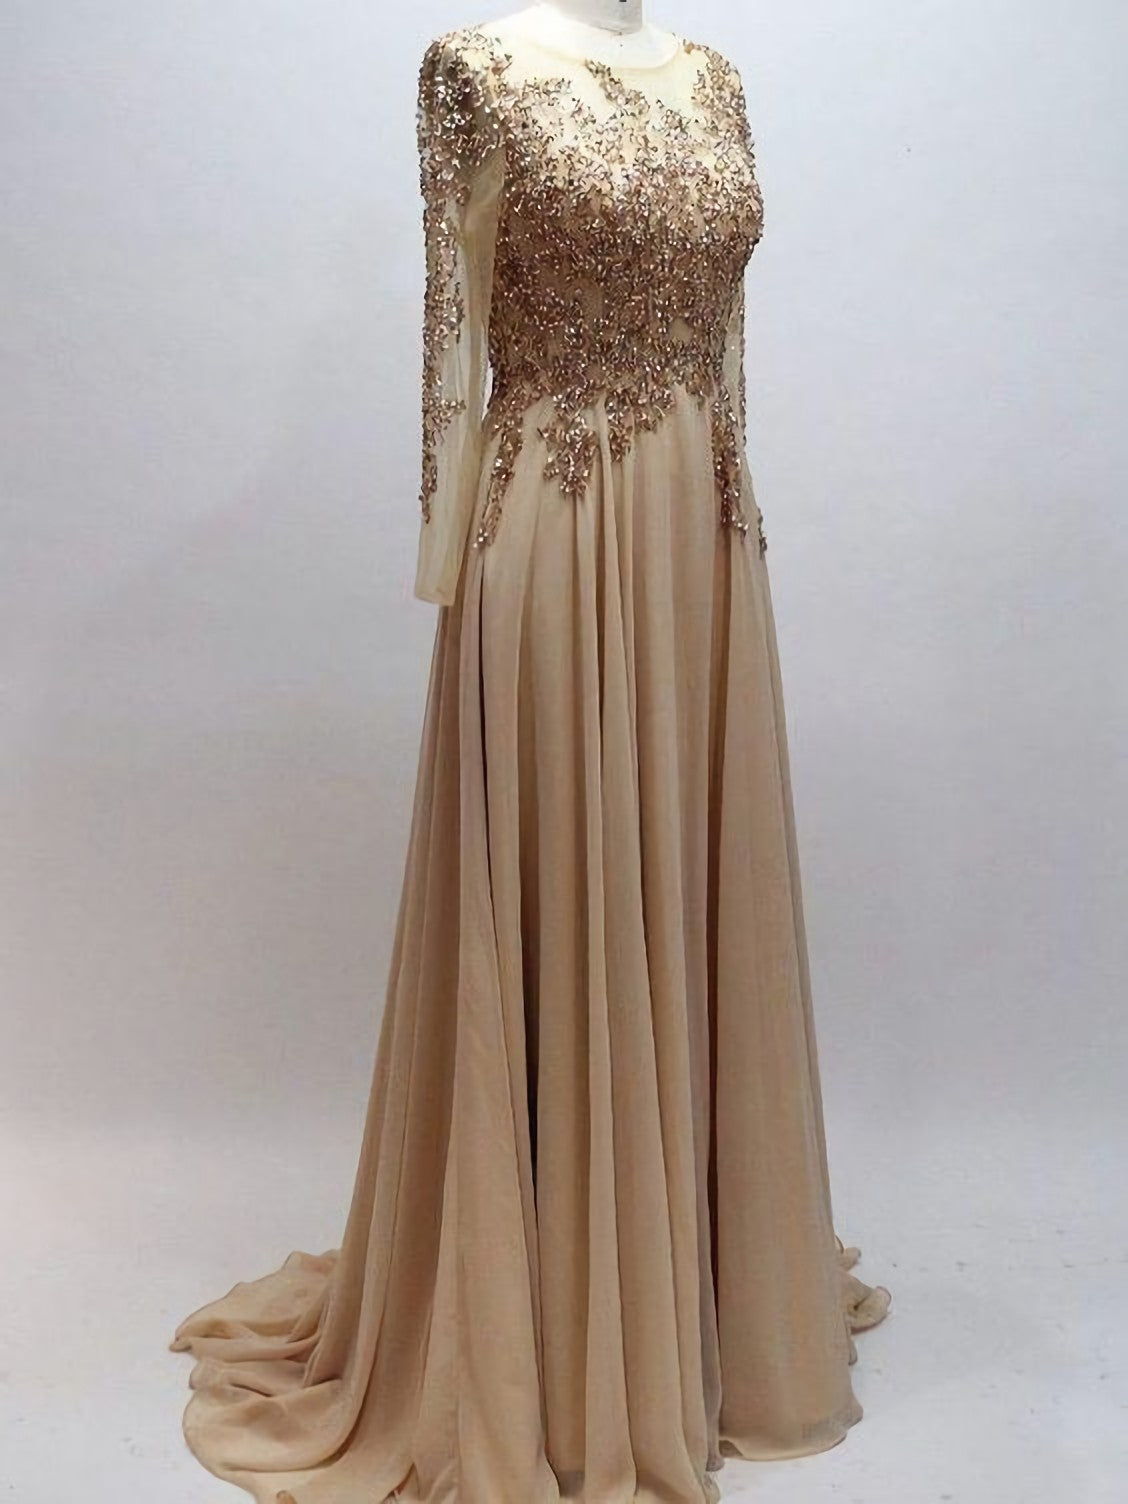 Homecomeing Dresses Long, A Line Scoop Neck Chiffon With Beaded Long Sleeves Prom Dresses